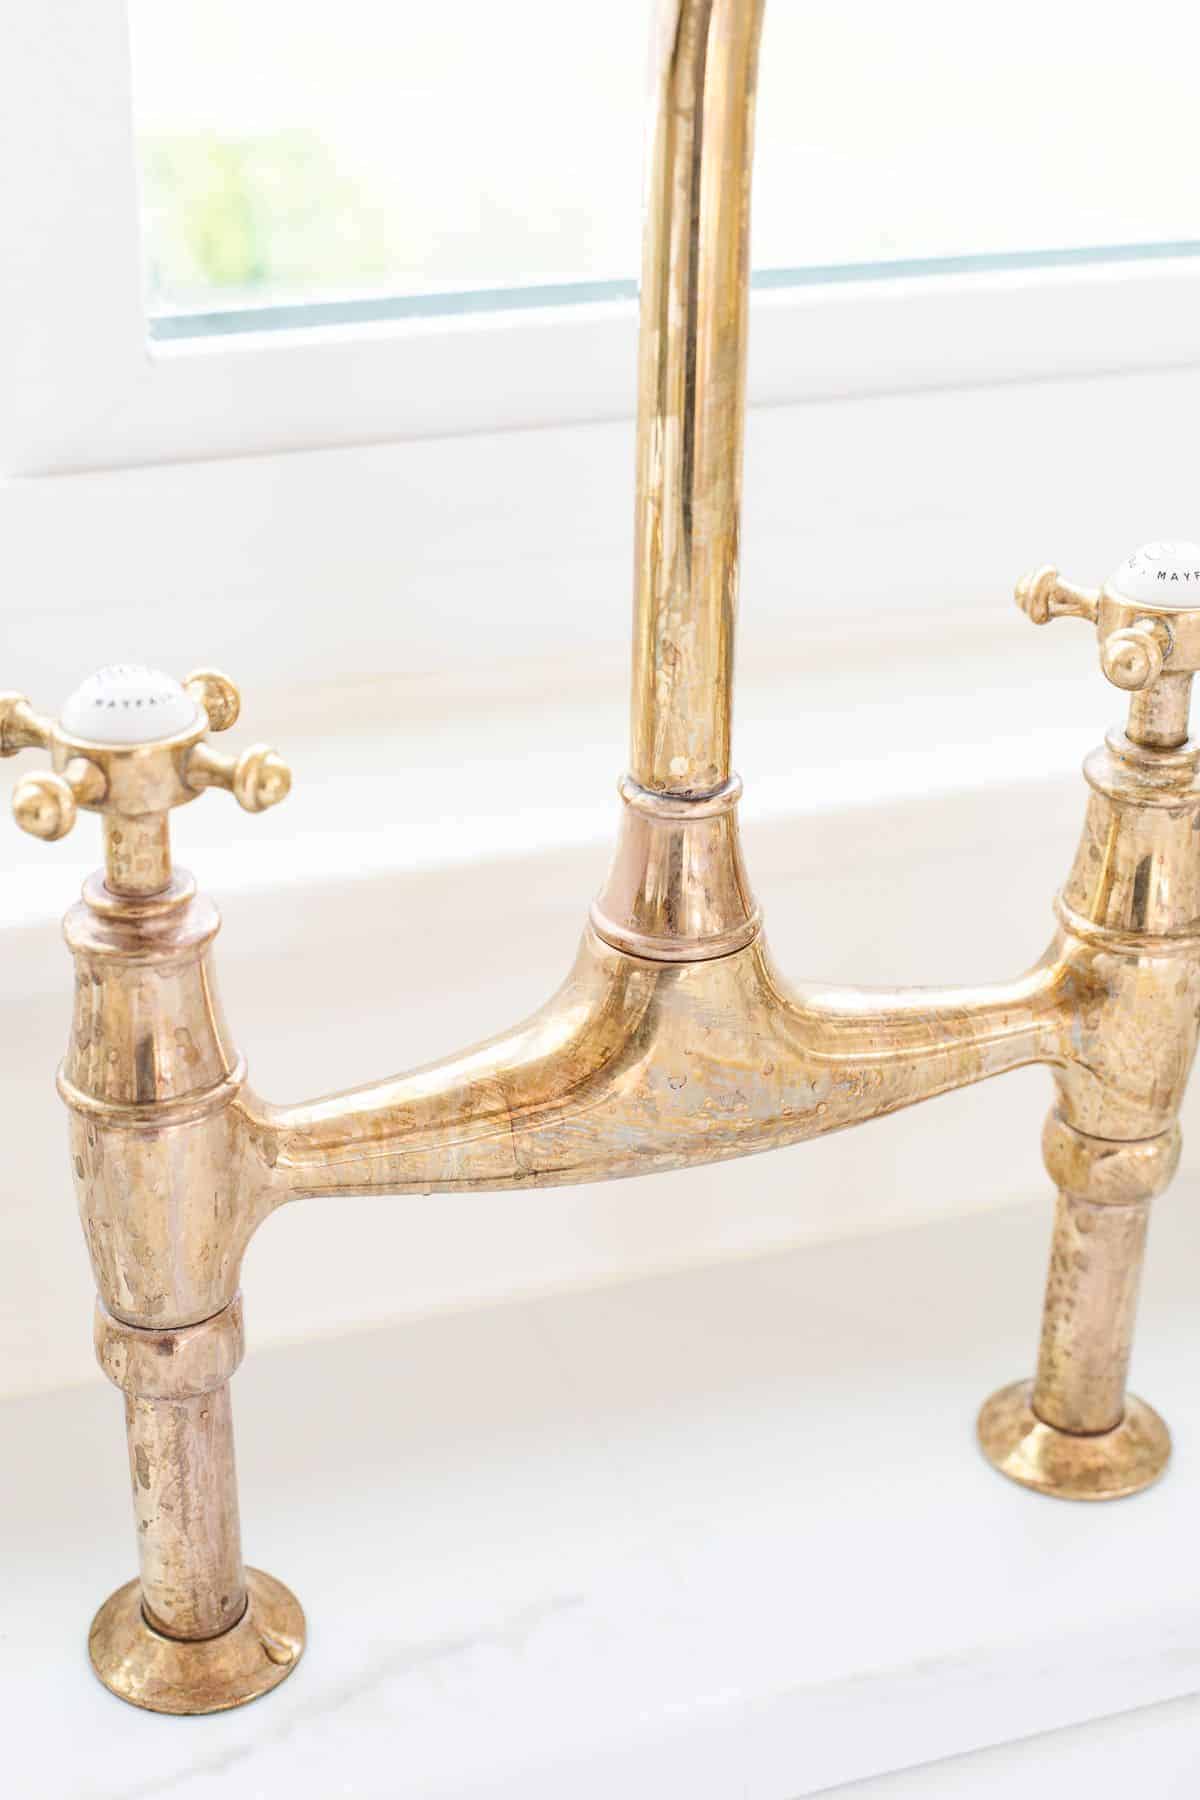 A brass kitchen faucet with some tarnish.